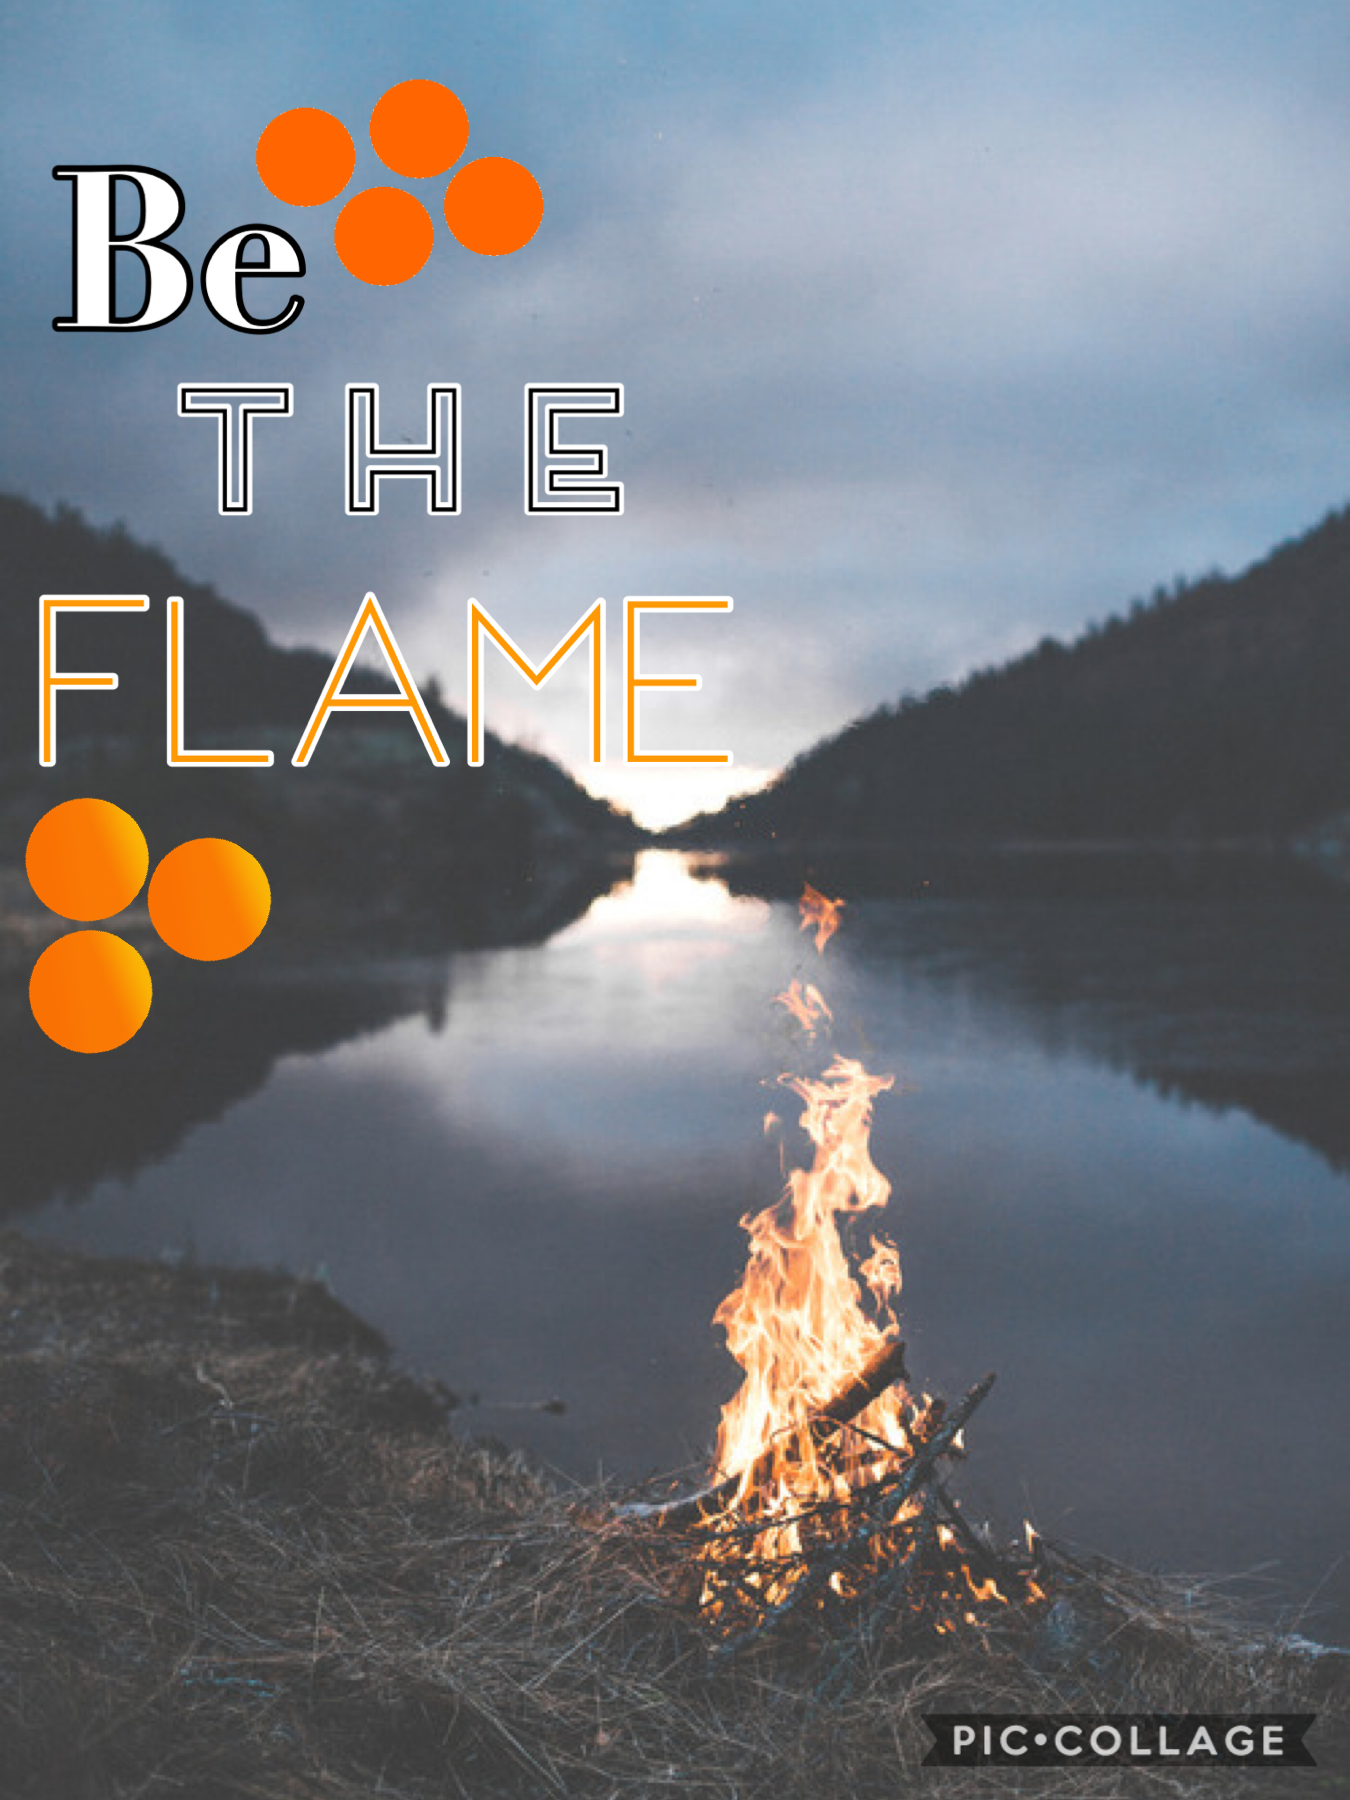 Be the flame 